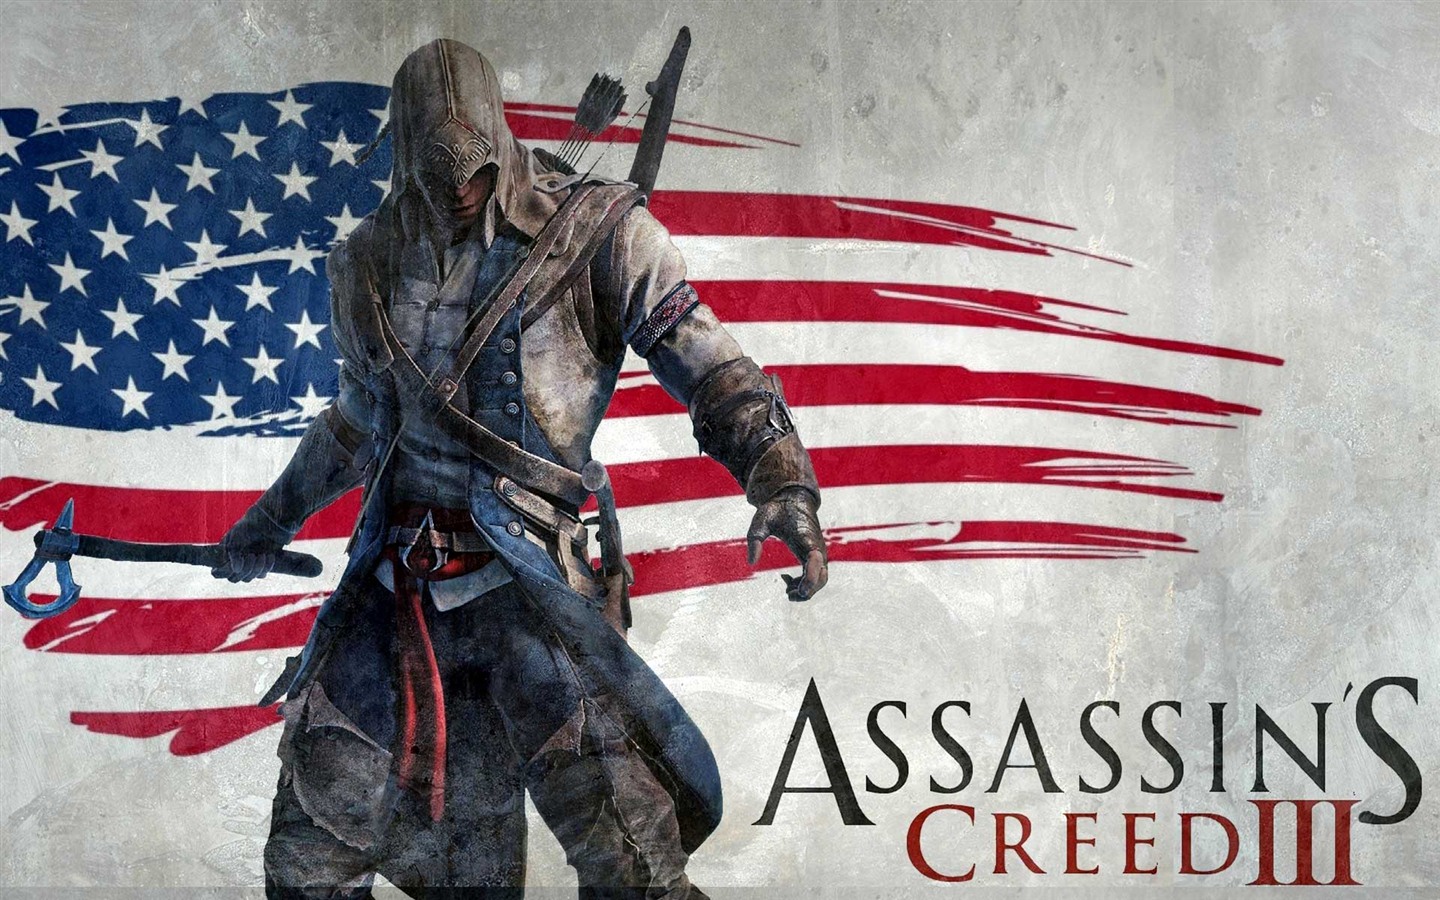 Assassin's Creed 3 HD wallpapers #12 - 1440x900